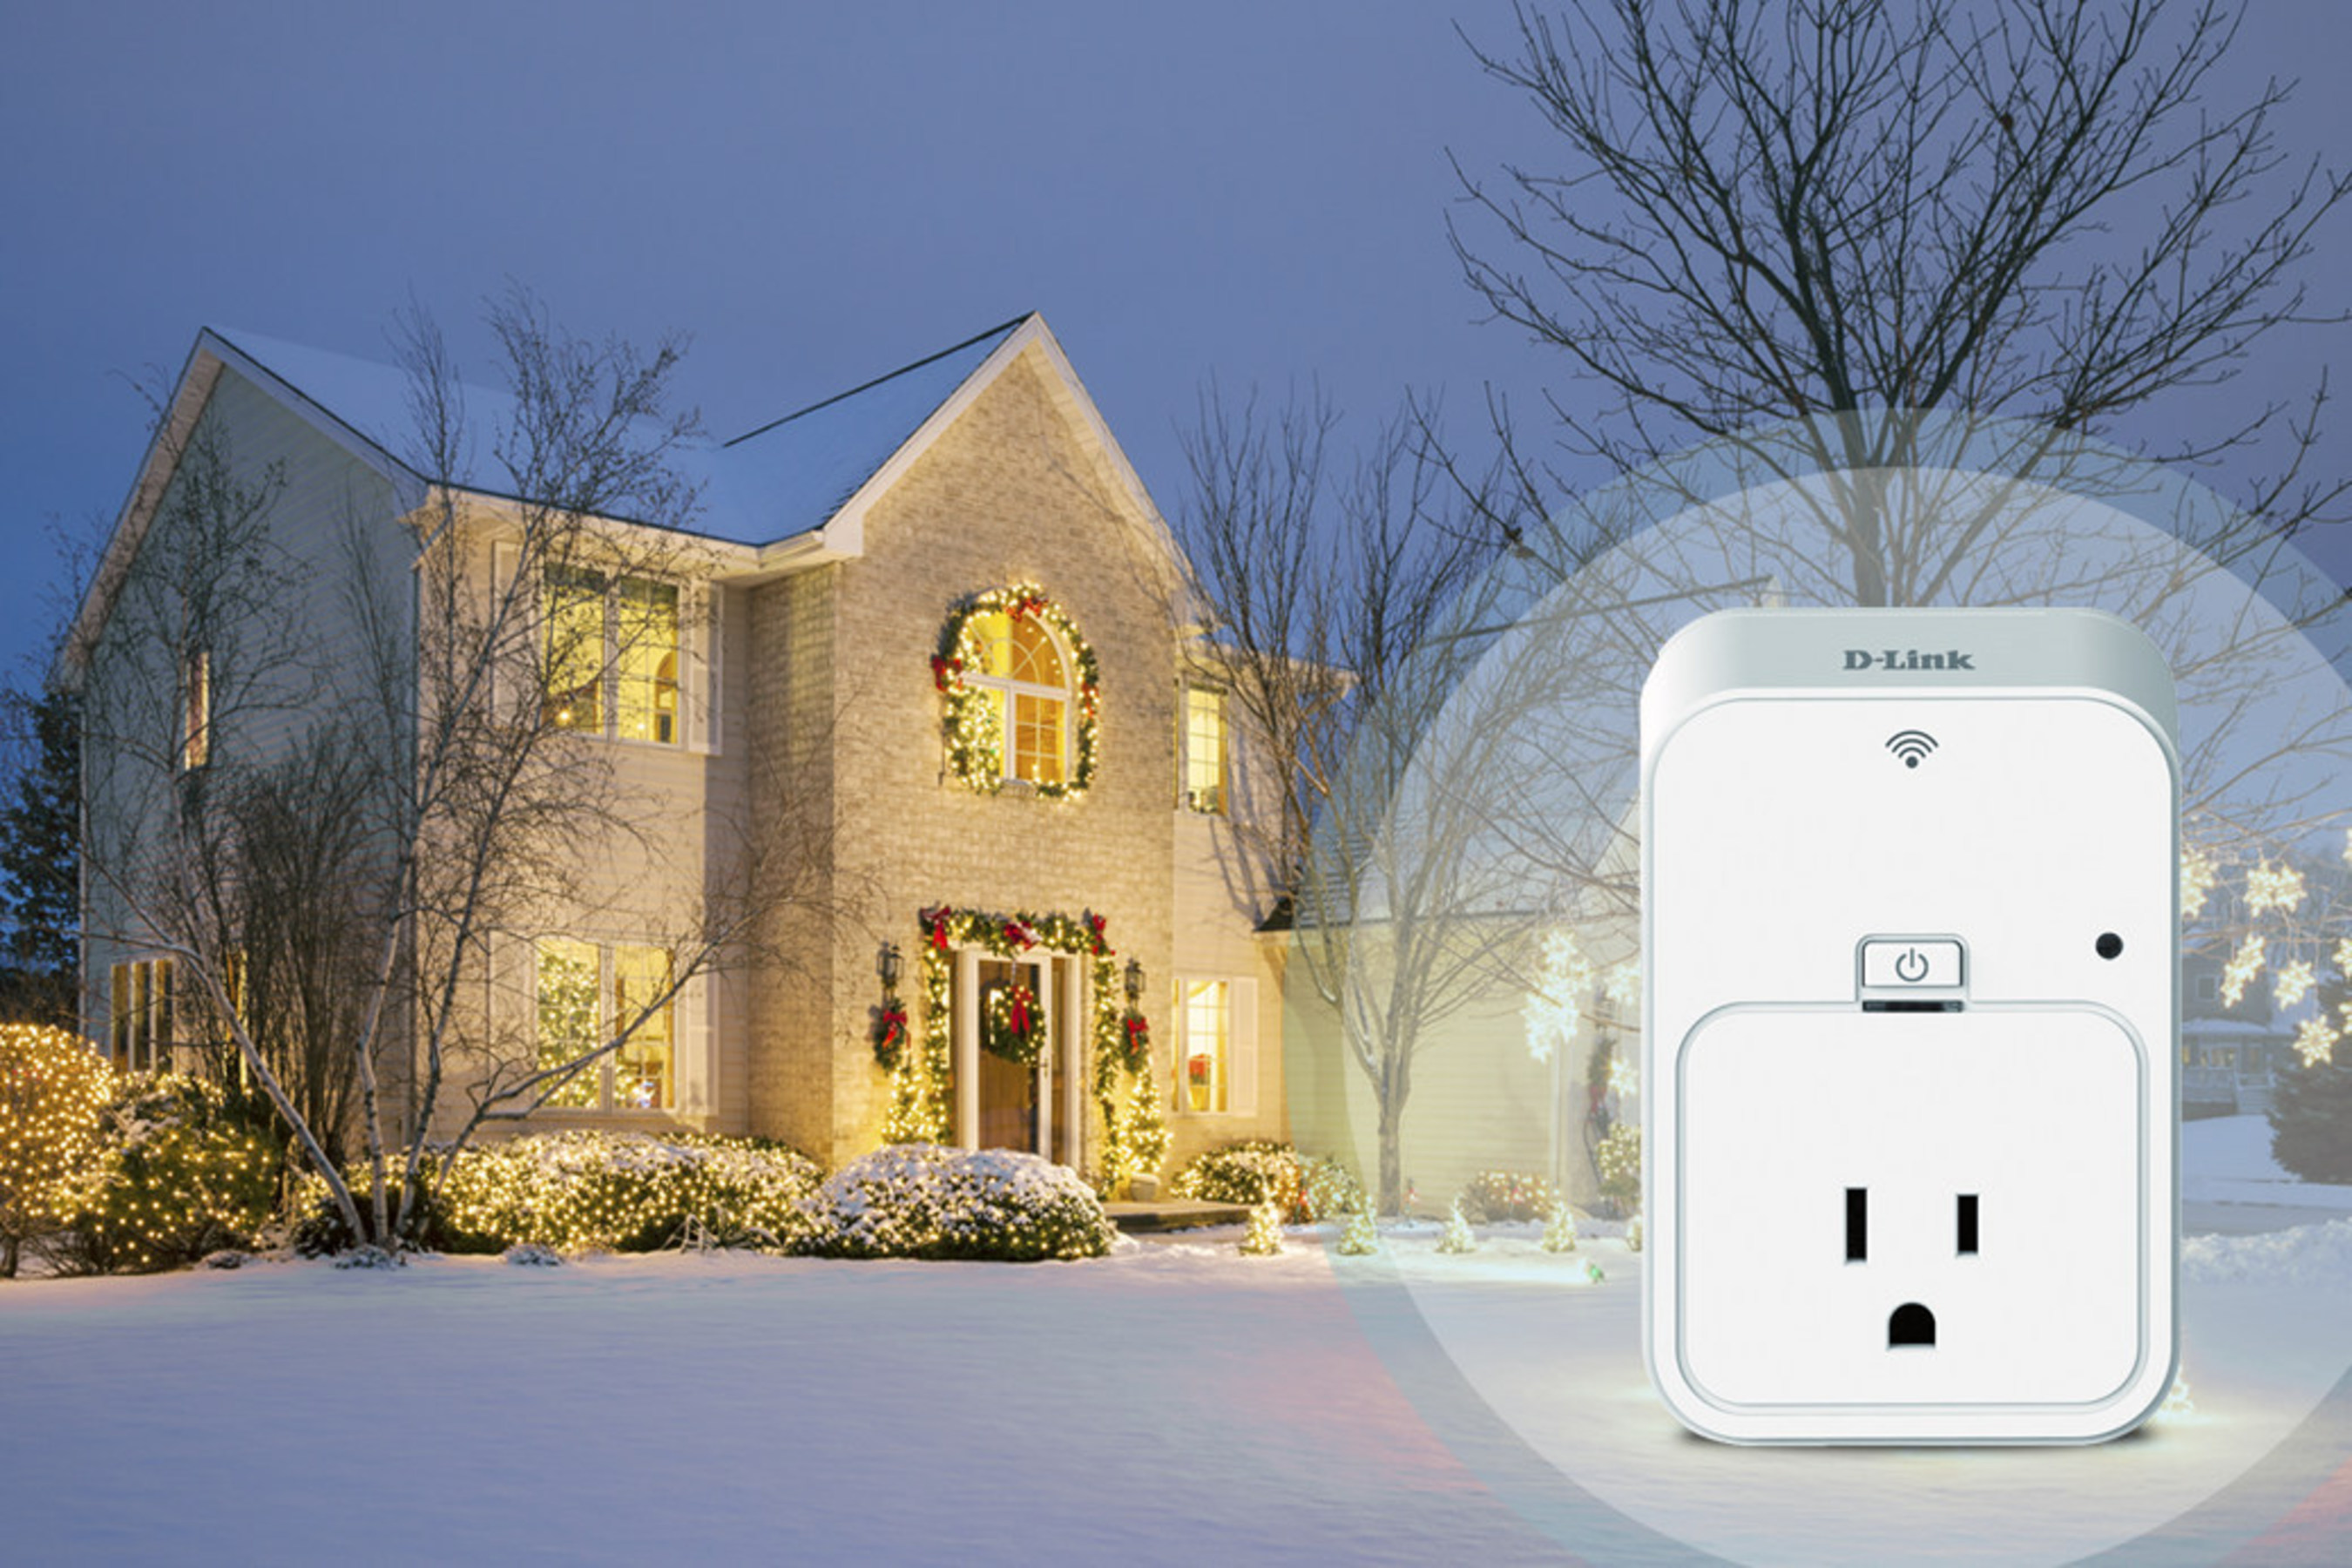 D-Link is offering several tech tips to help make this holiday season fun, safe and trouble-free.